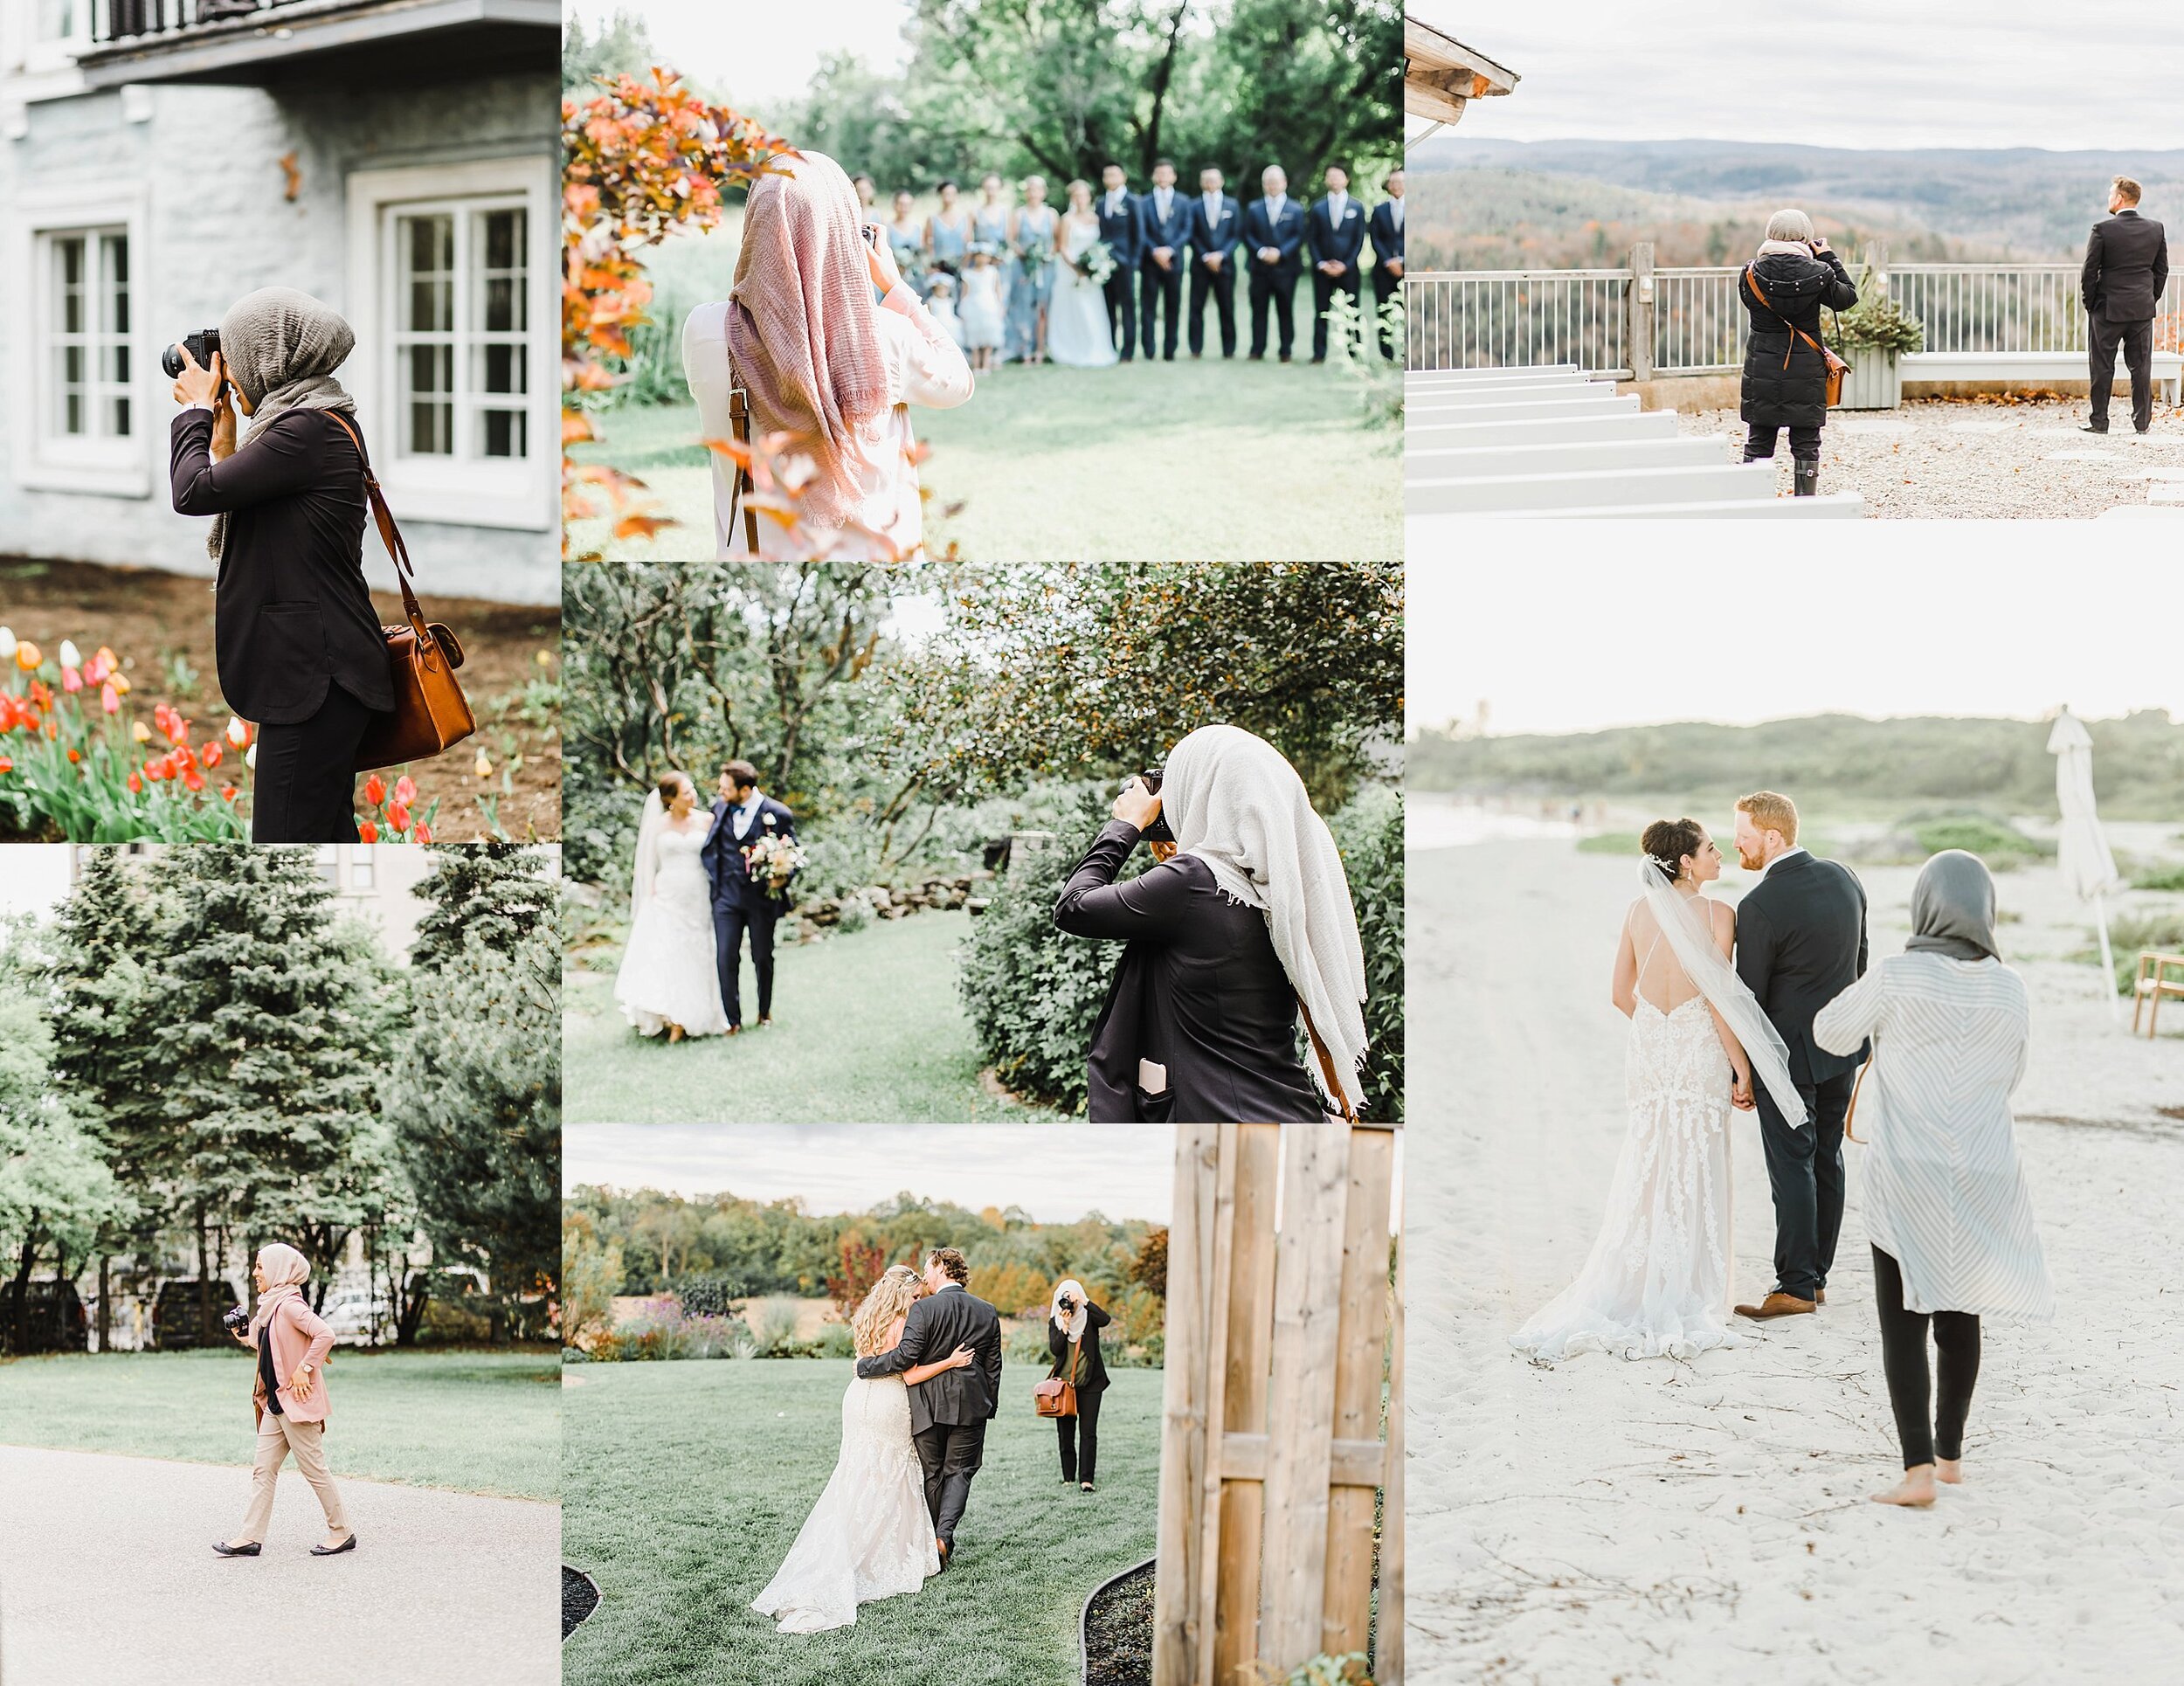  Thanks to all the sweet, wonderful couples who trusted us to capture their special days. It was an exhilarating year, getting published in WeddingBells Magazine and ending the season off with a huge bang in Mexico.  Now it’s time to take it easy ove